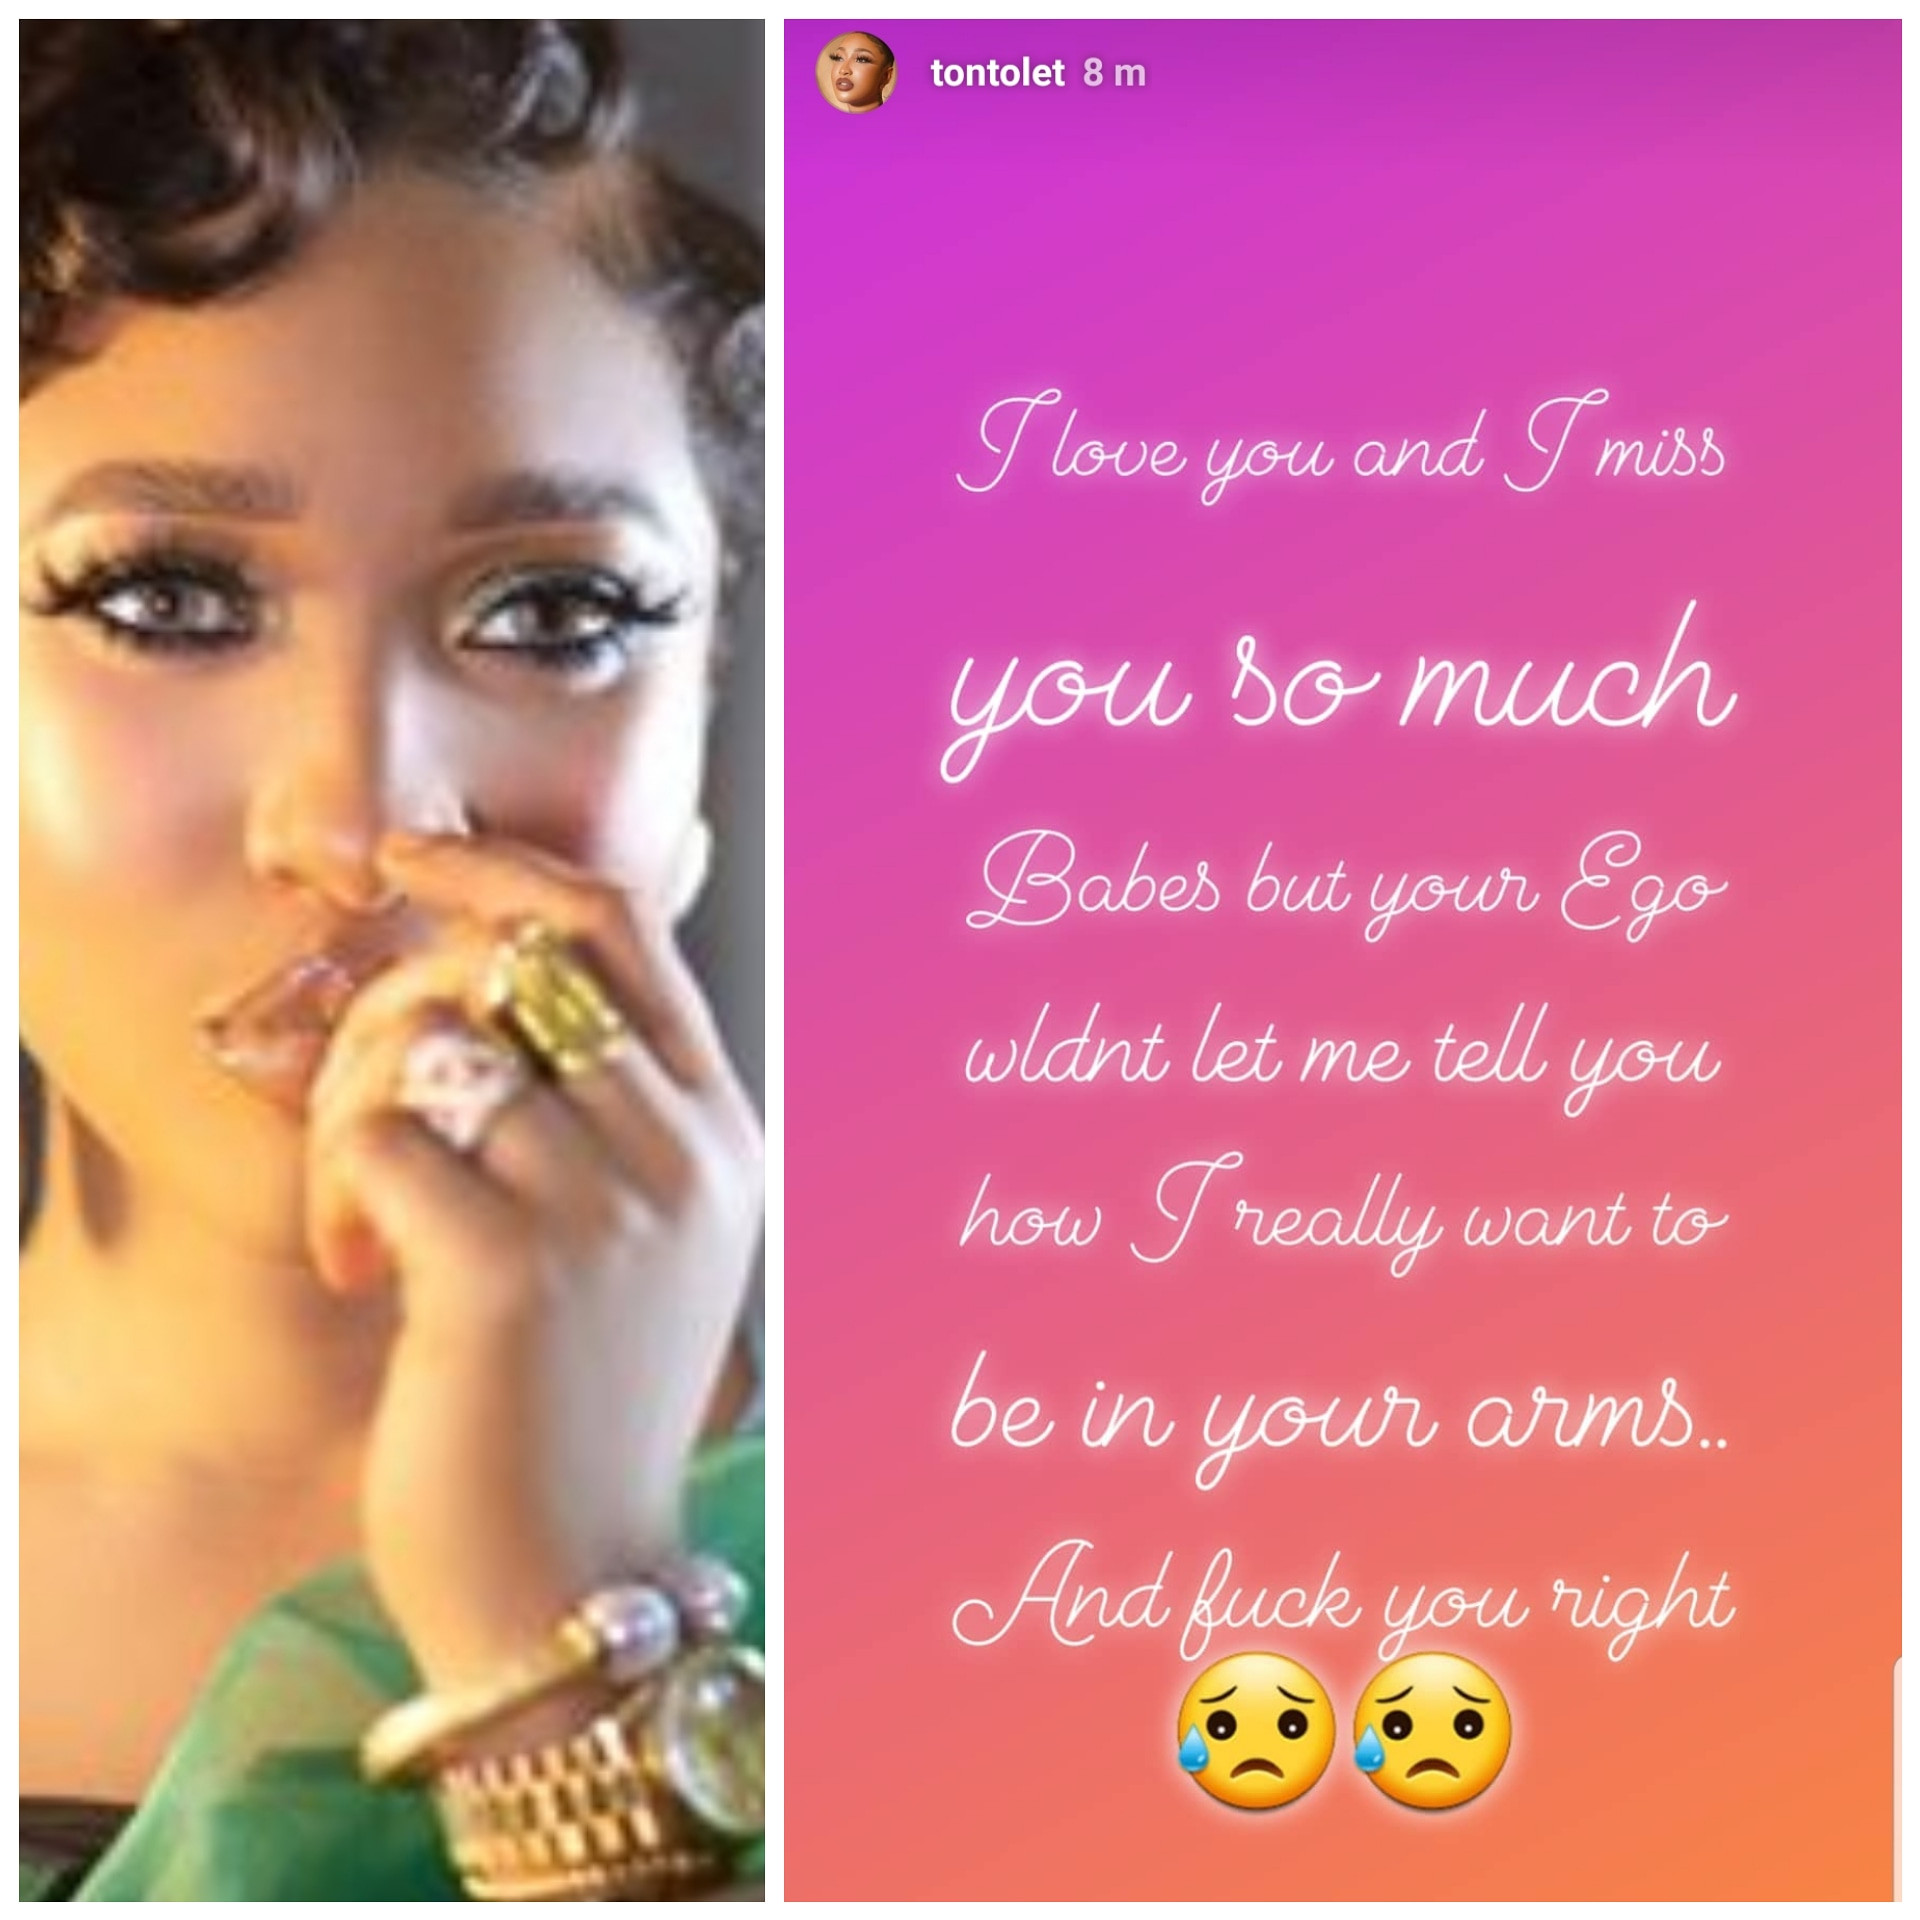 Tonto Dikeh's post on her Instagram story